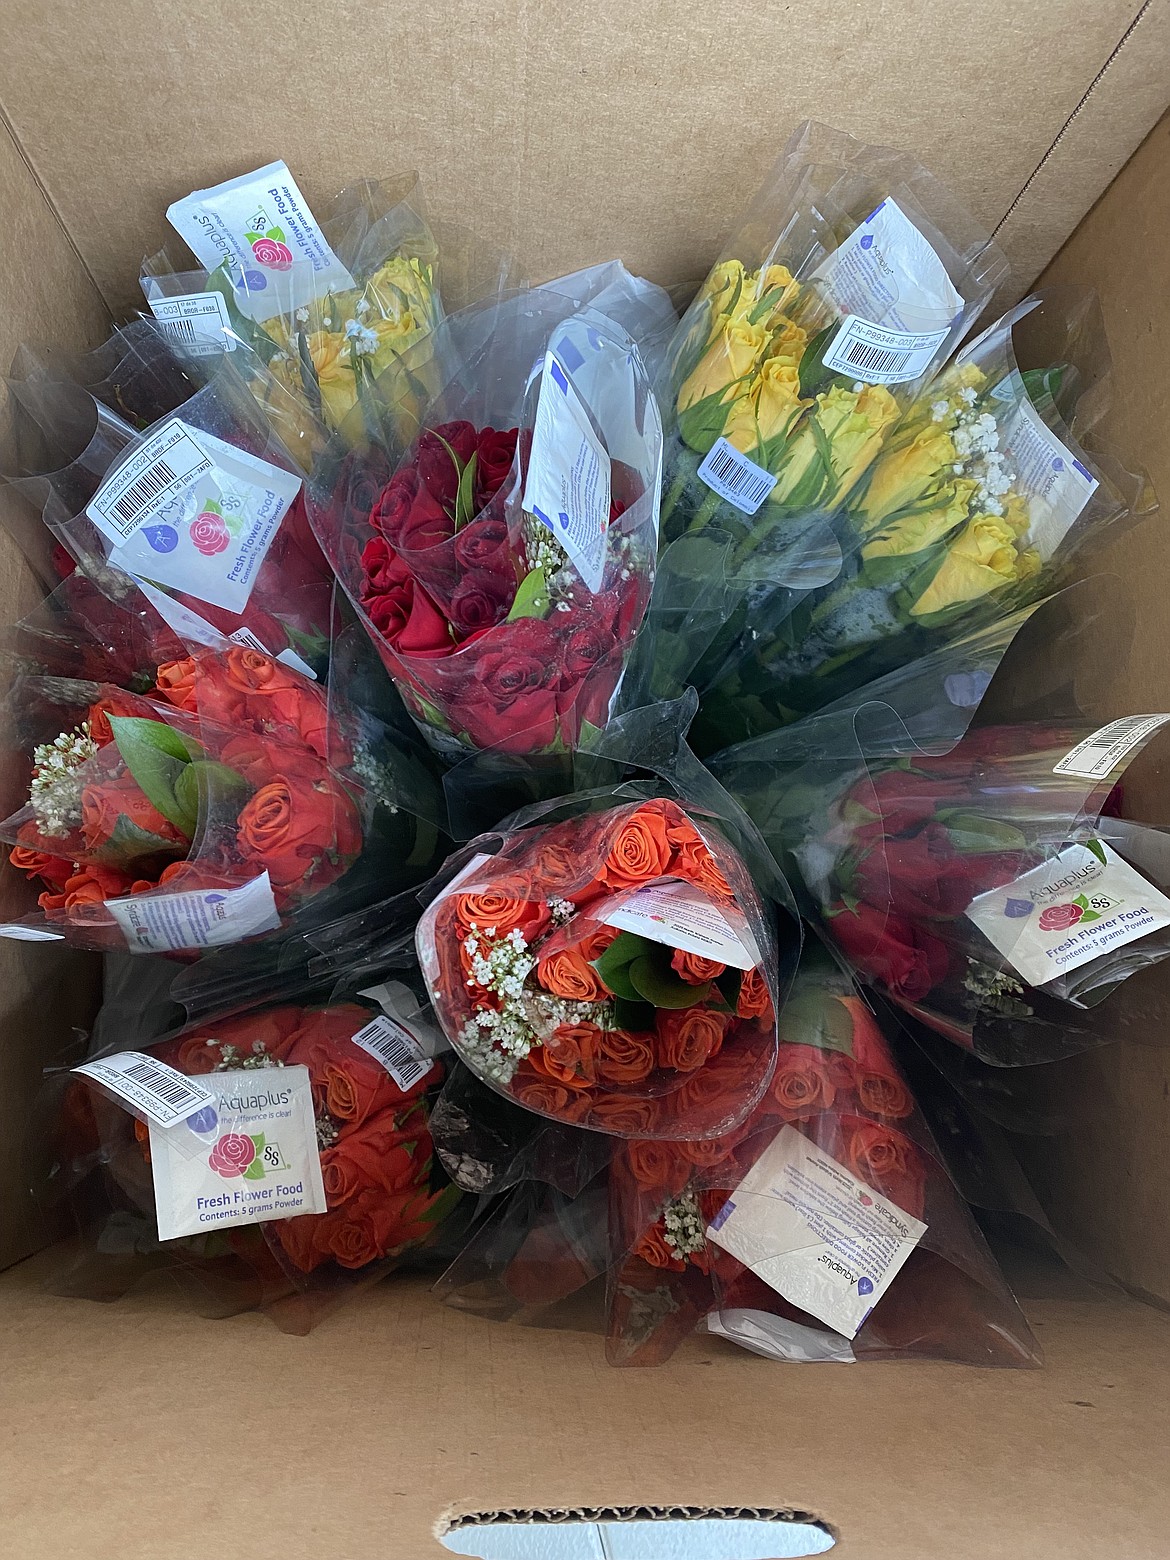 Boxes full of multi-colored blooms awaited eager Rotarians Friday morning.